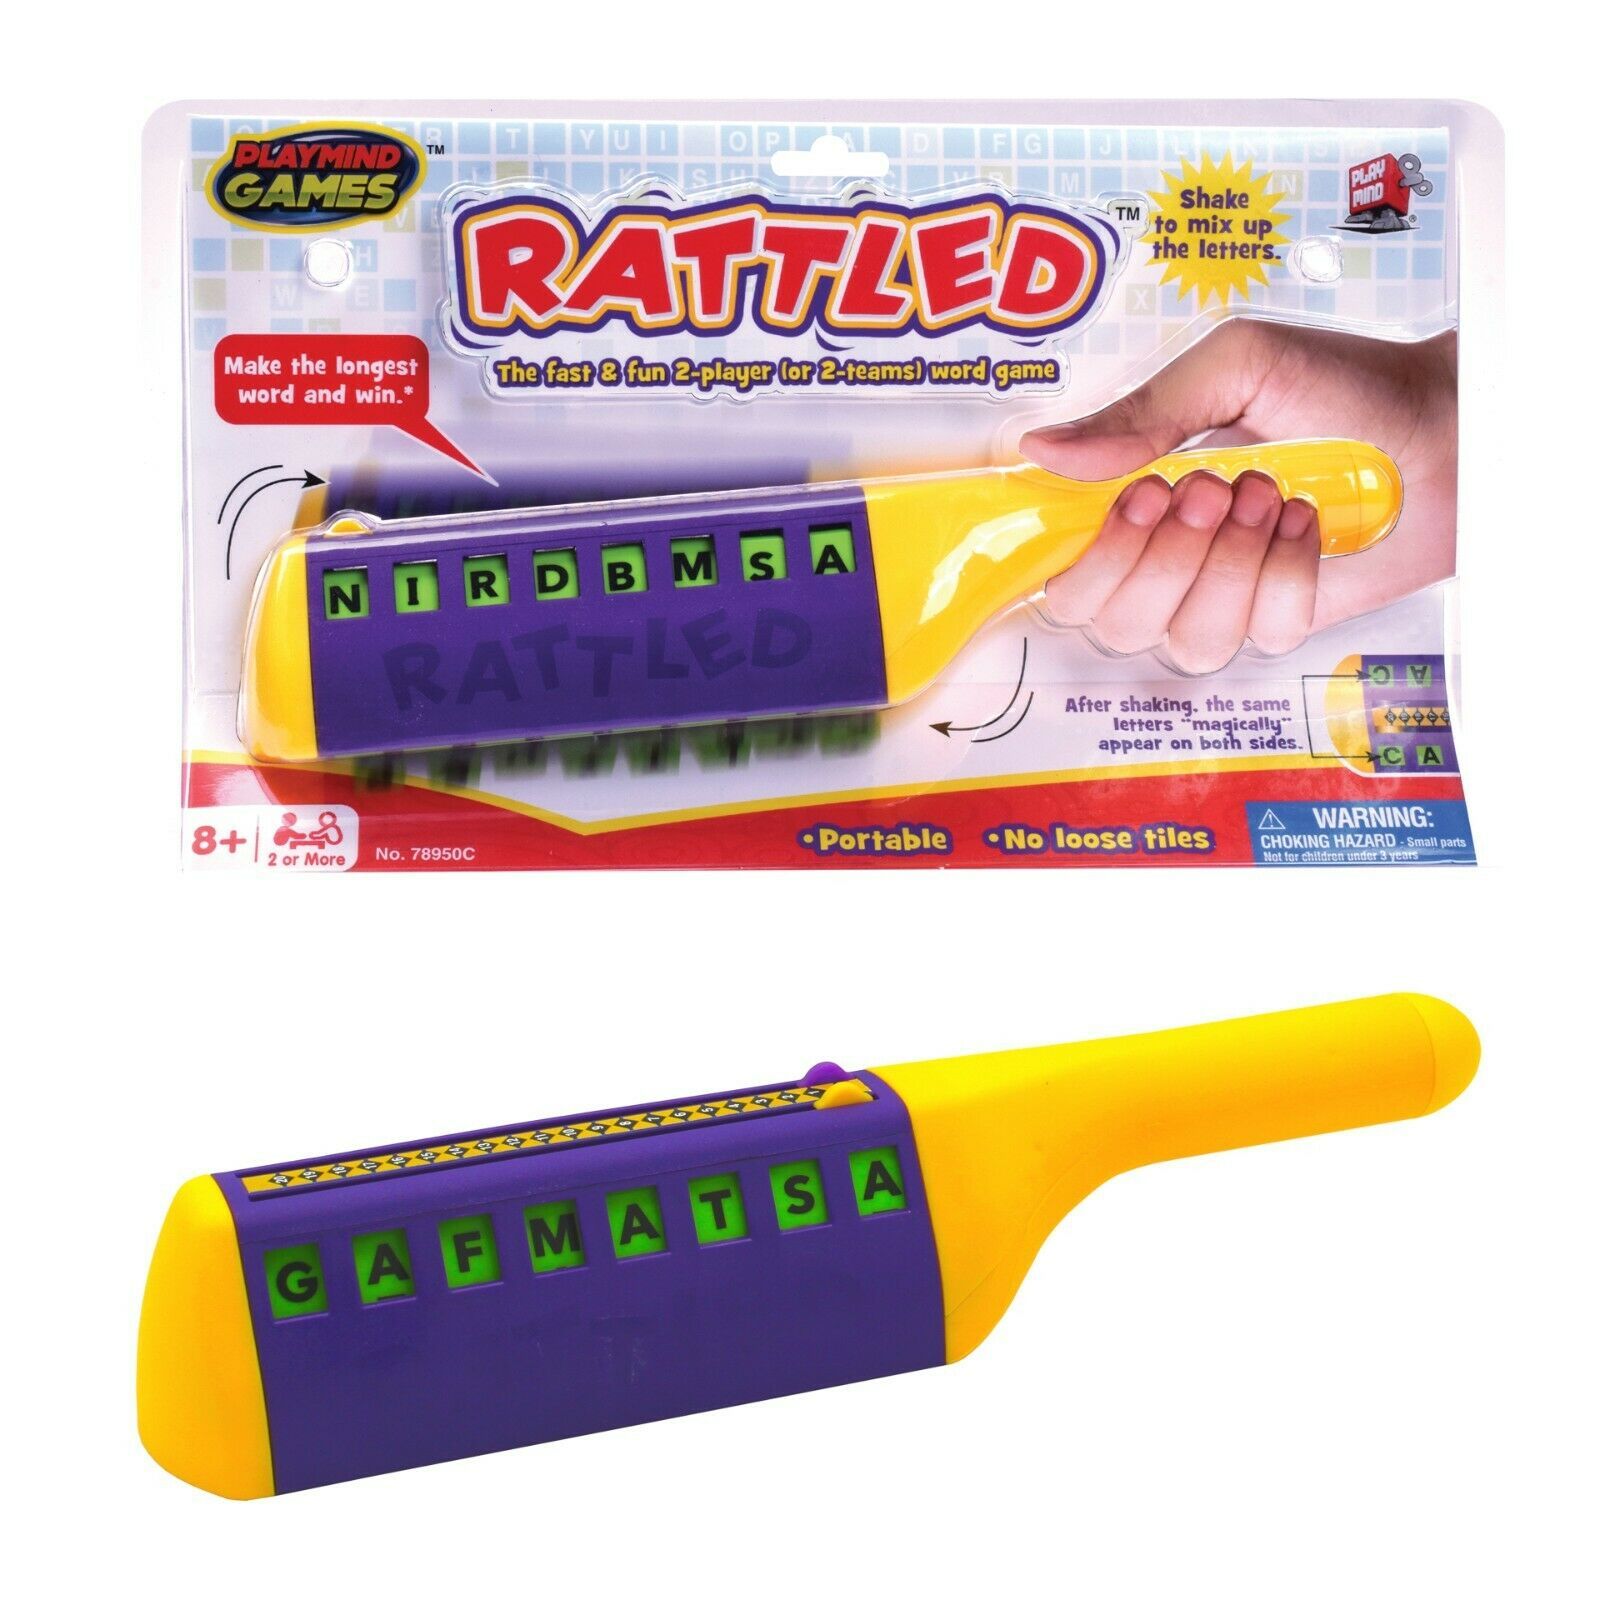 Rattled - Fast & Fun 2-Player Word Spelling Game! Race To Build The Longest word